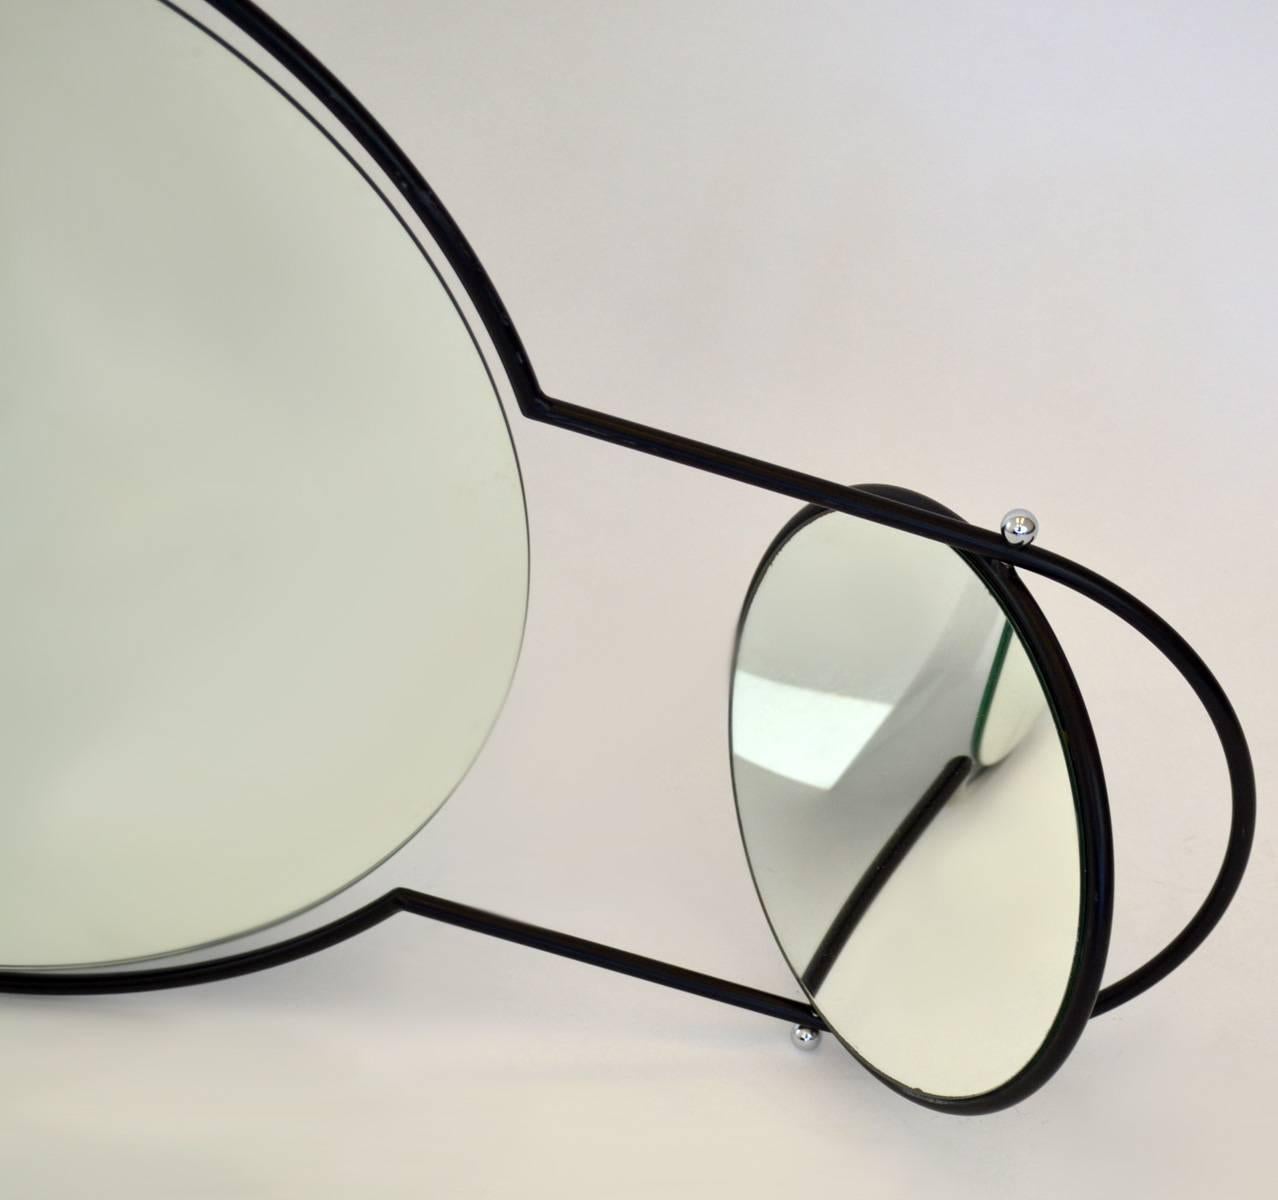 Modernist wall mirror by Rodney Kinsman for Bieffeplast, Italy, 1980s. Two-piece swivel double mirror in black iron frame which can be hung vertically or horizontally. Minimalist functional design. Labeled.